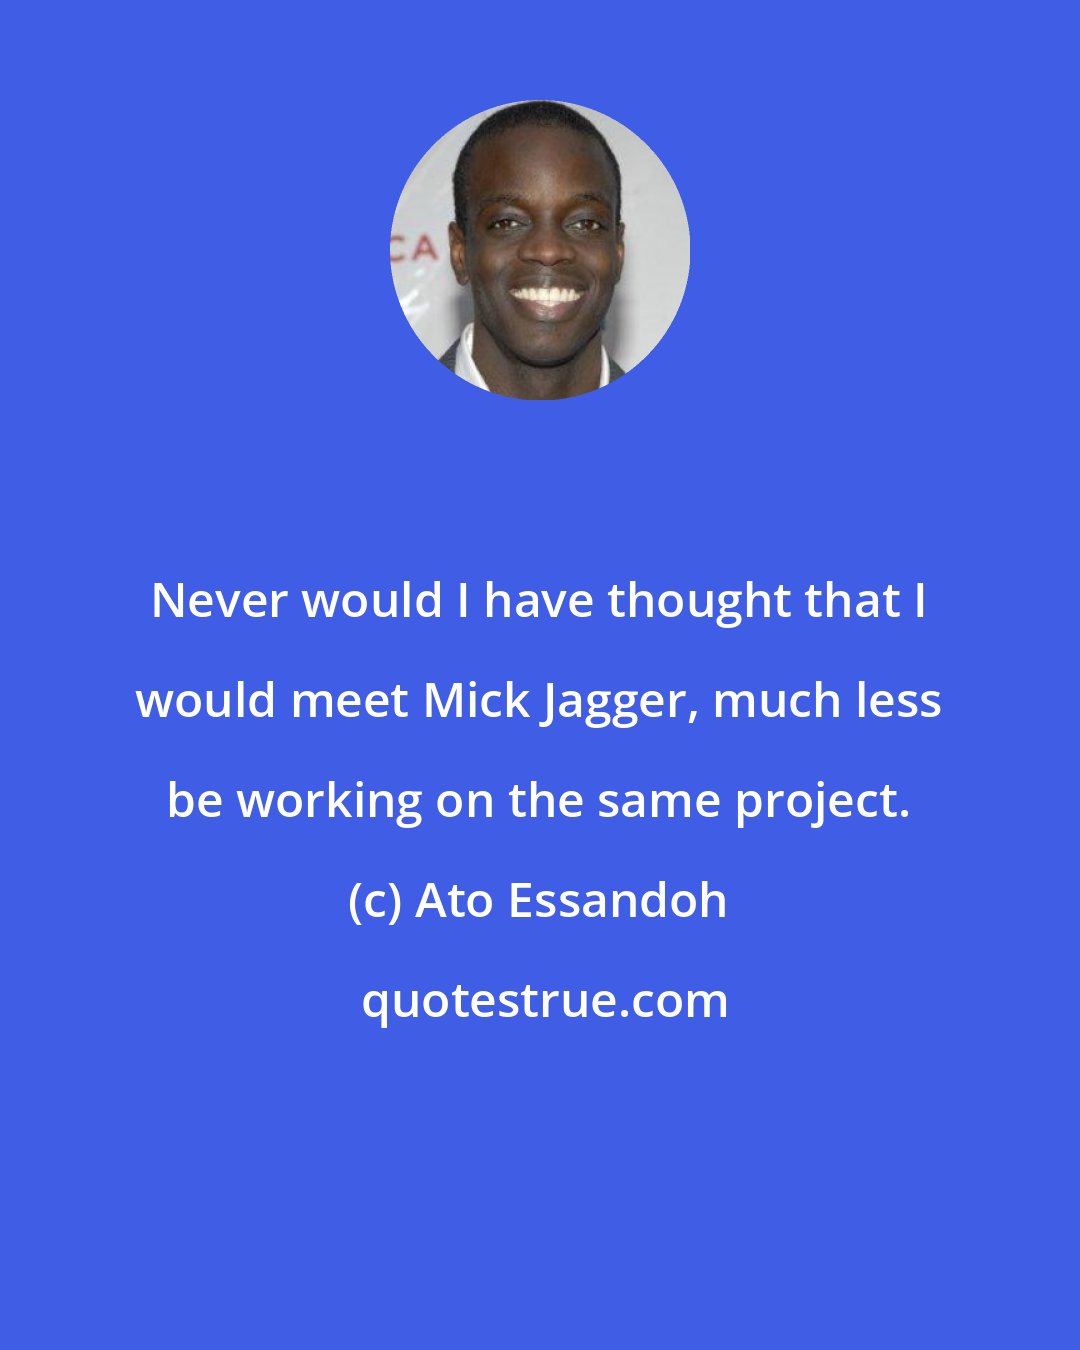 Ato Essandoh: Never would I have thought that I would meet Mick Jagger, much less be working on the same project.